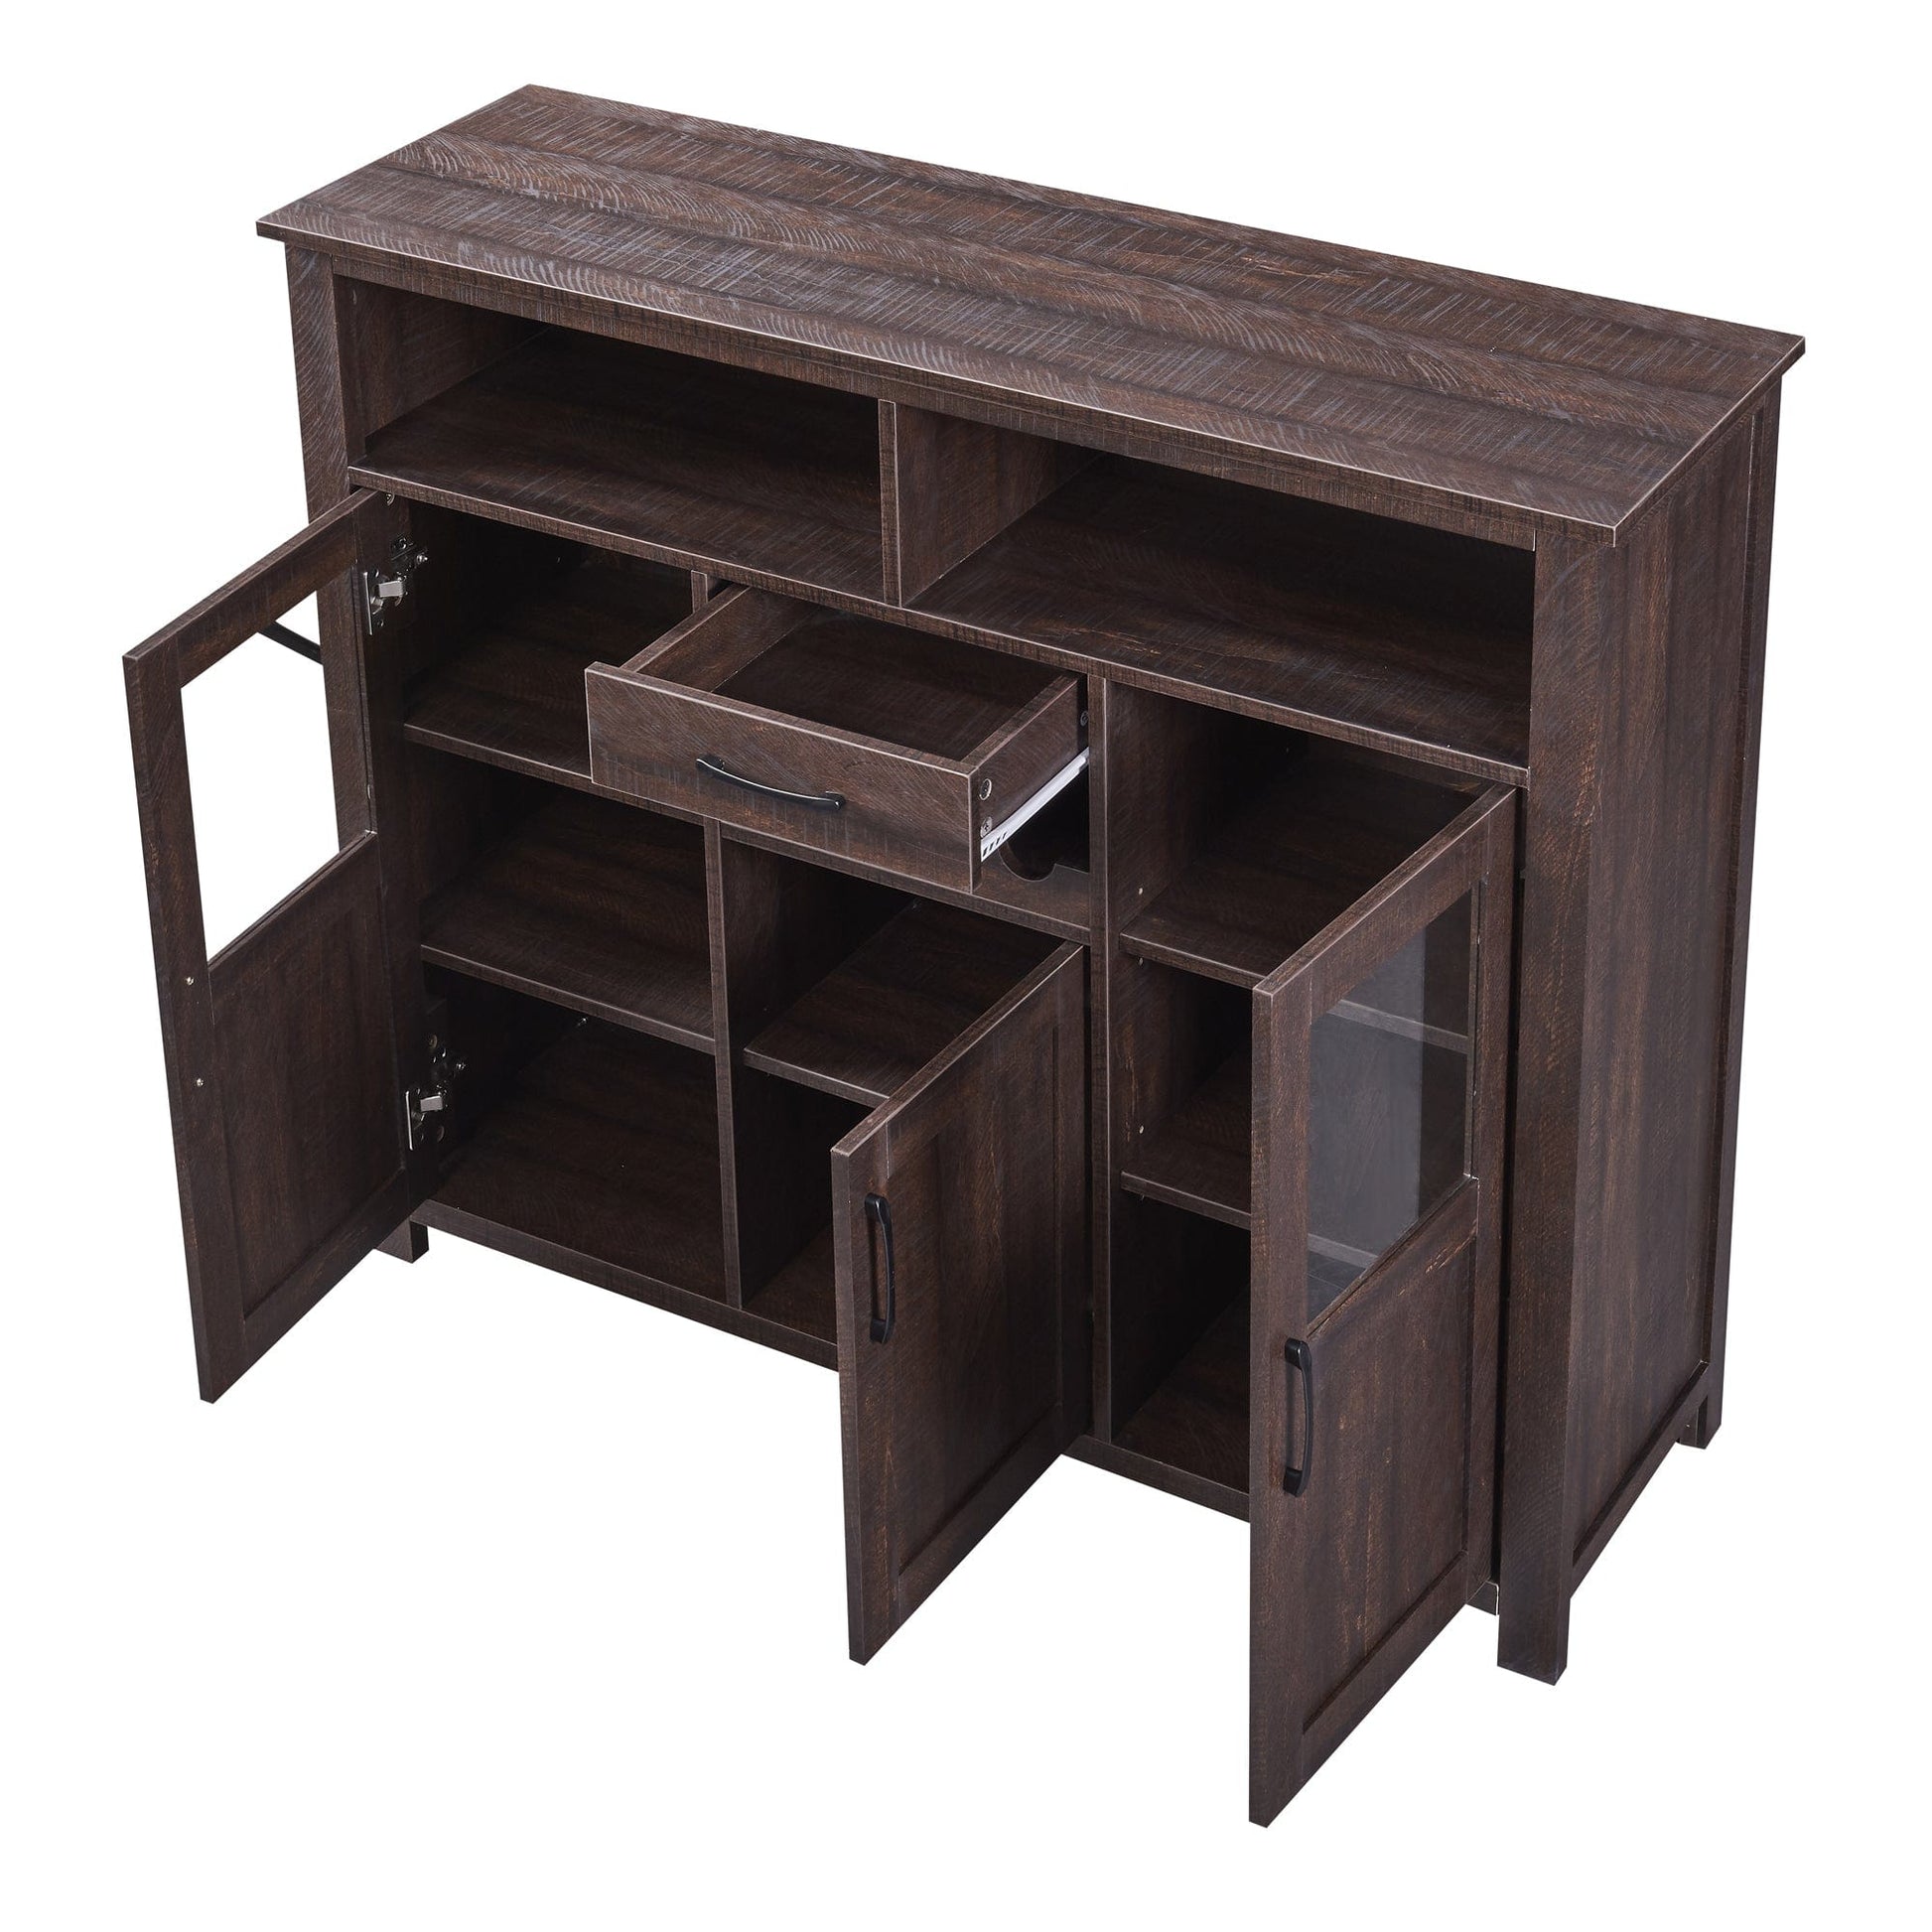 1st Choice Furniture Direct Sideboard 1st Choice Vintage Style Espresso Sideboard with Wine Rack and Drawer